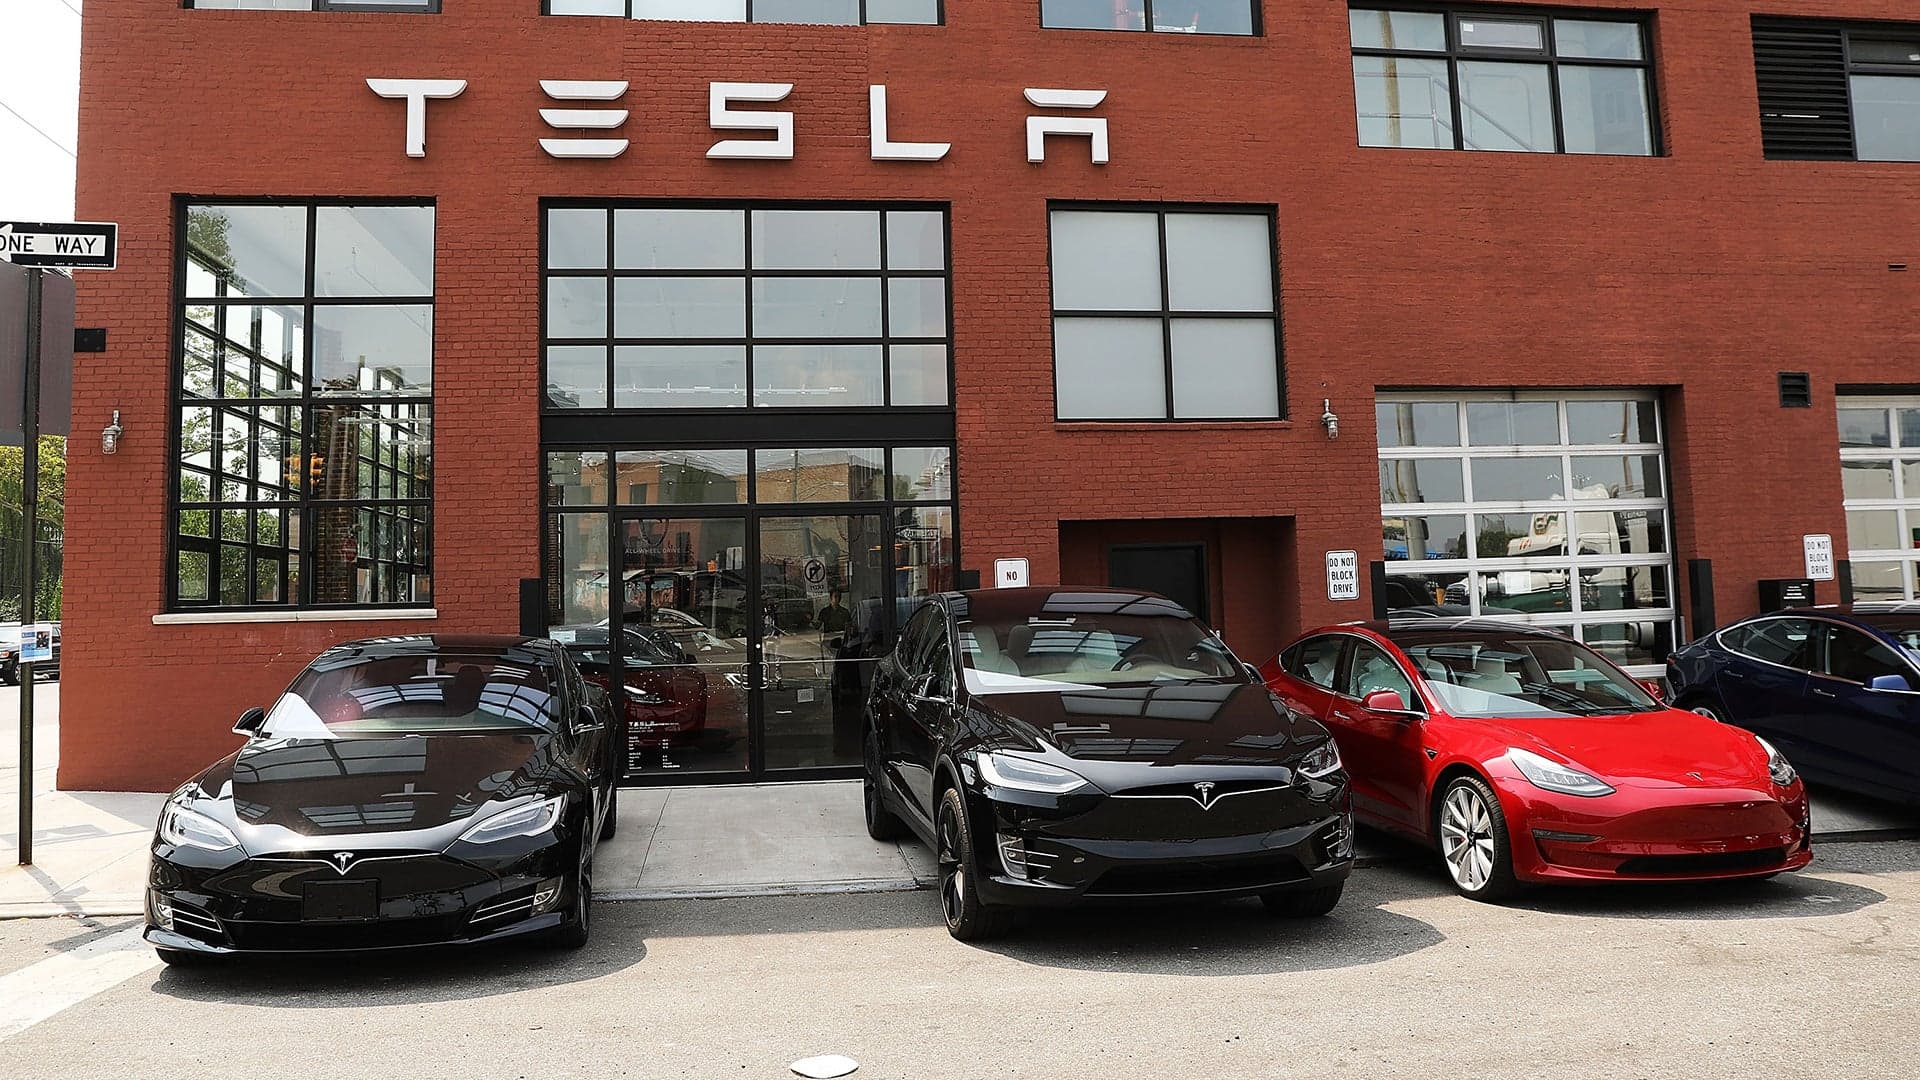 Tesla Moving to Online-Only Sales, Closing Showrooms to Cut Costs